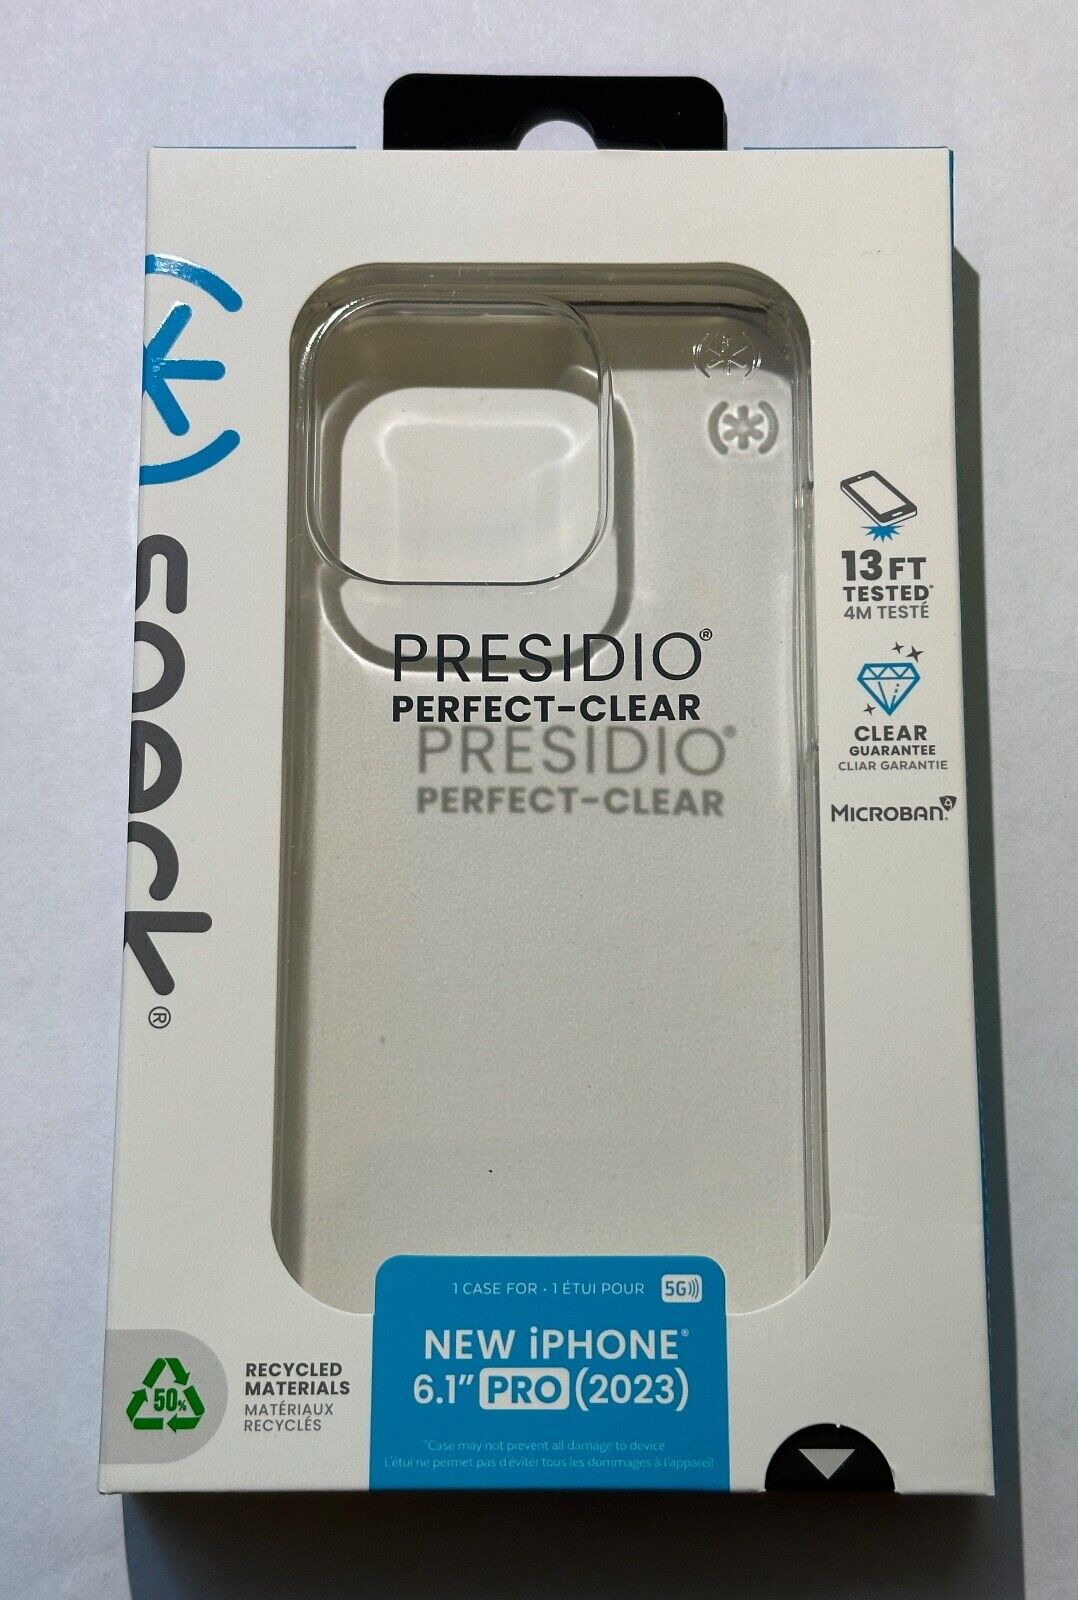 NEW Speck Presidio Perfect-Clear Case for iPhone 15 Pro (6.1